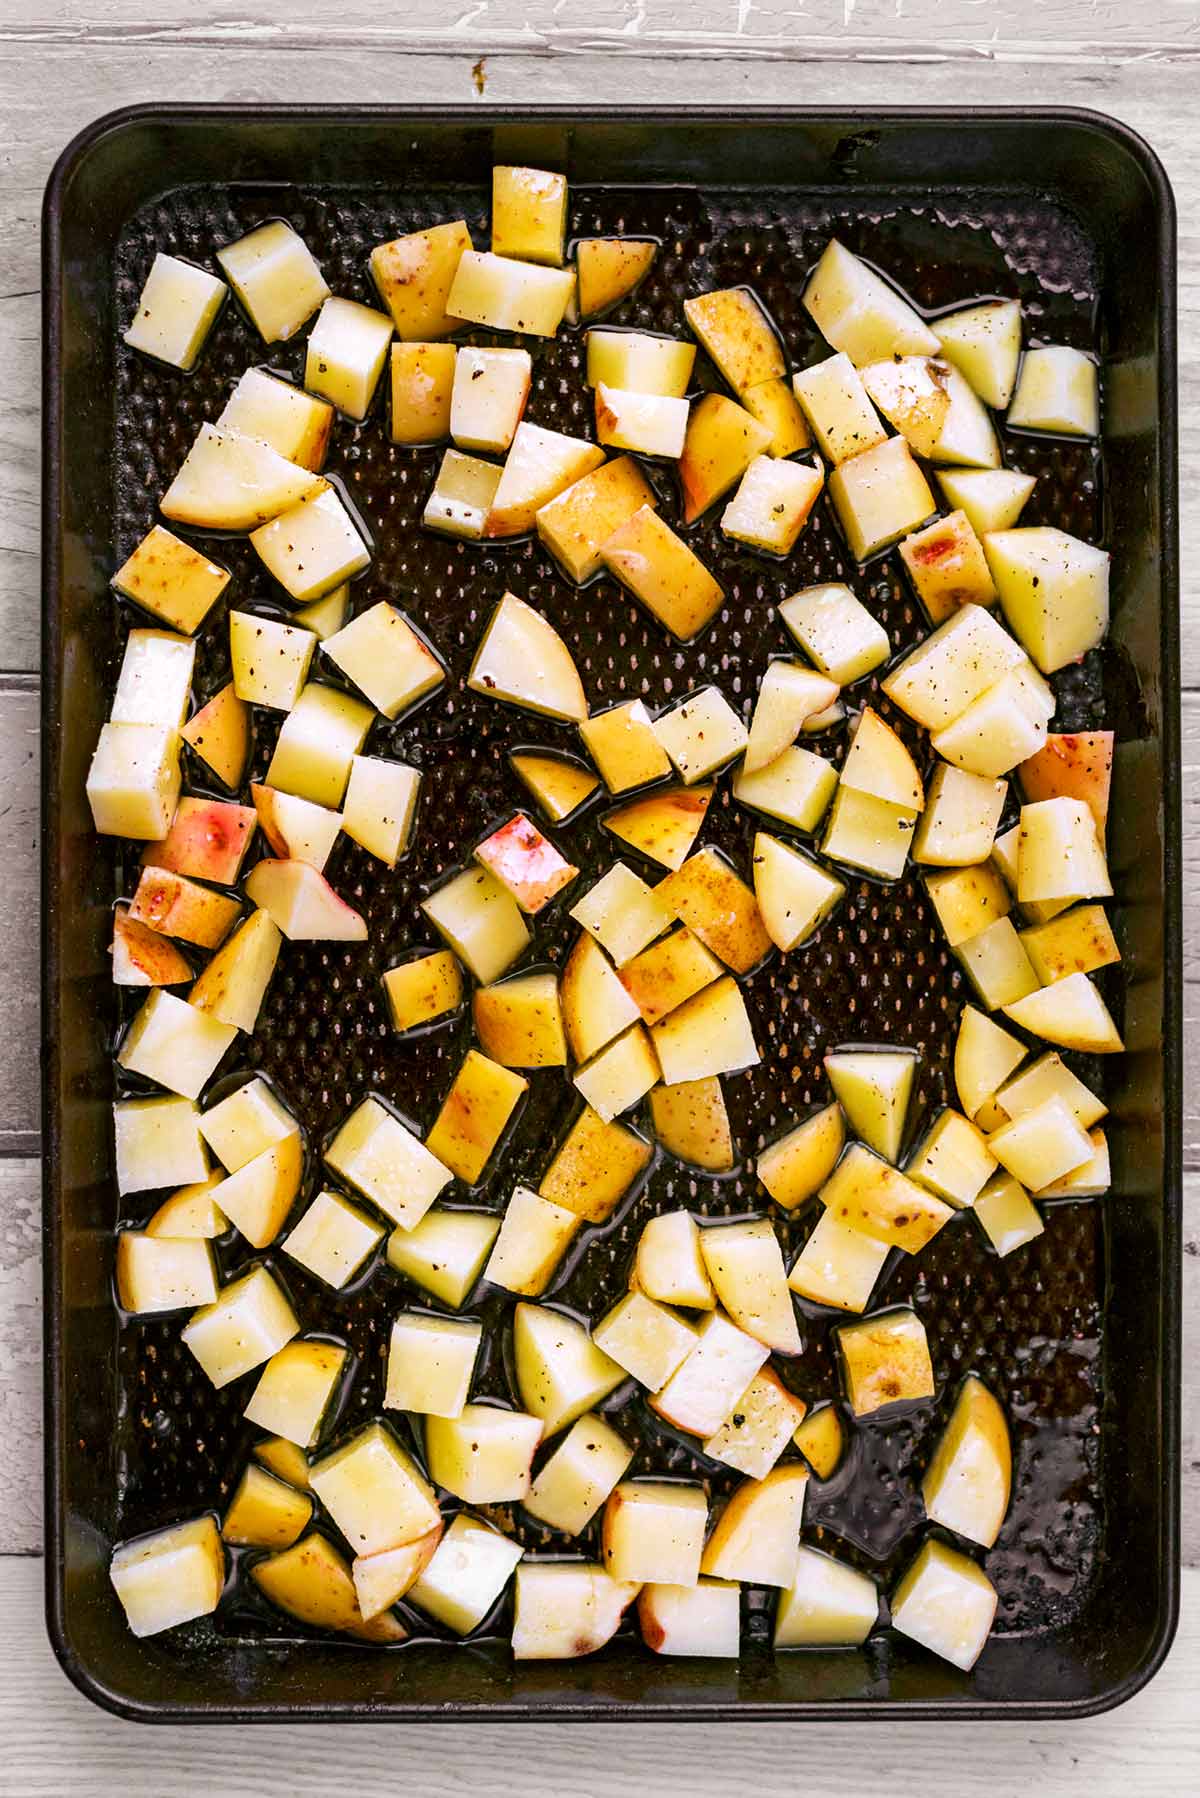 A baking tray with cubes of potato on it.